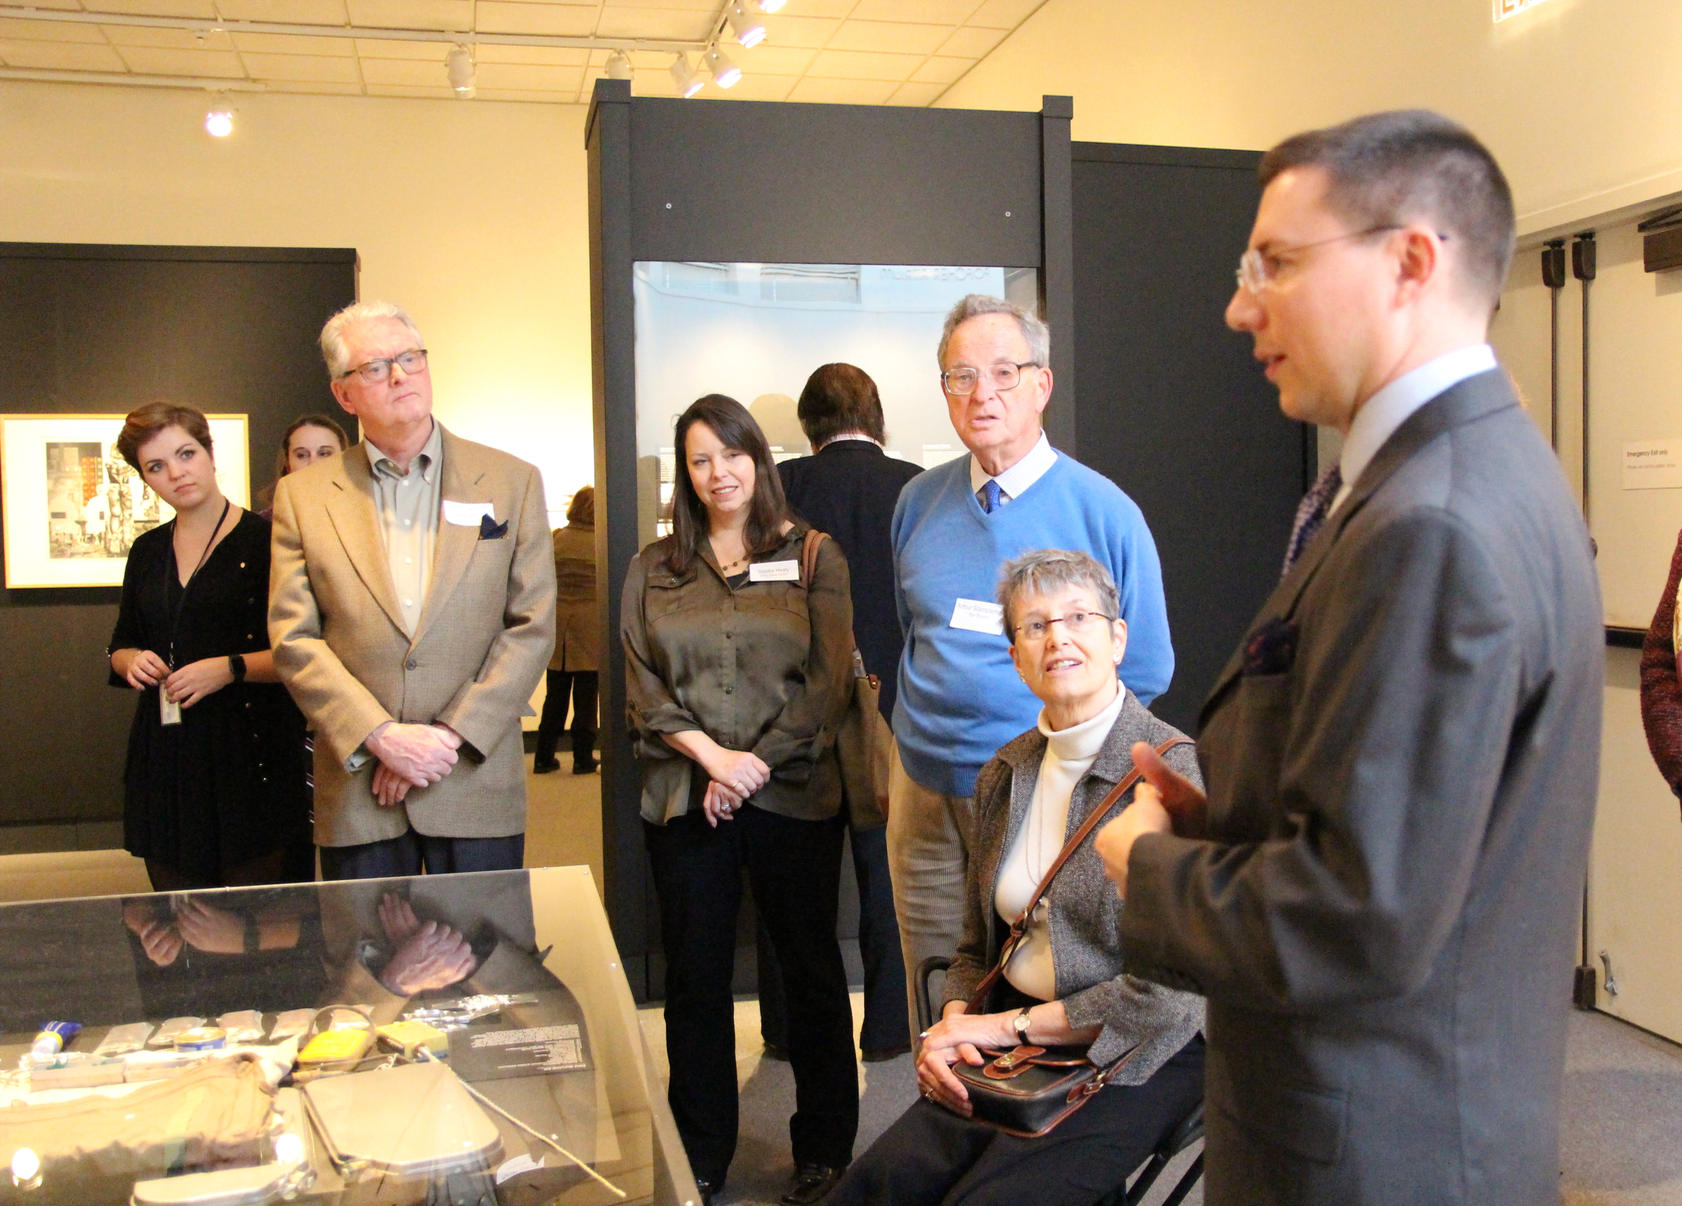 Dr. Daniel Ksepka guided press through "Hot Art in a Cold War," which continues through May 20.